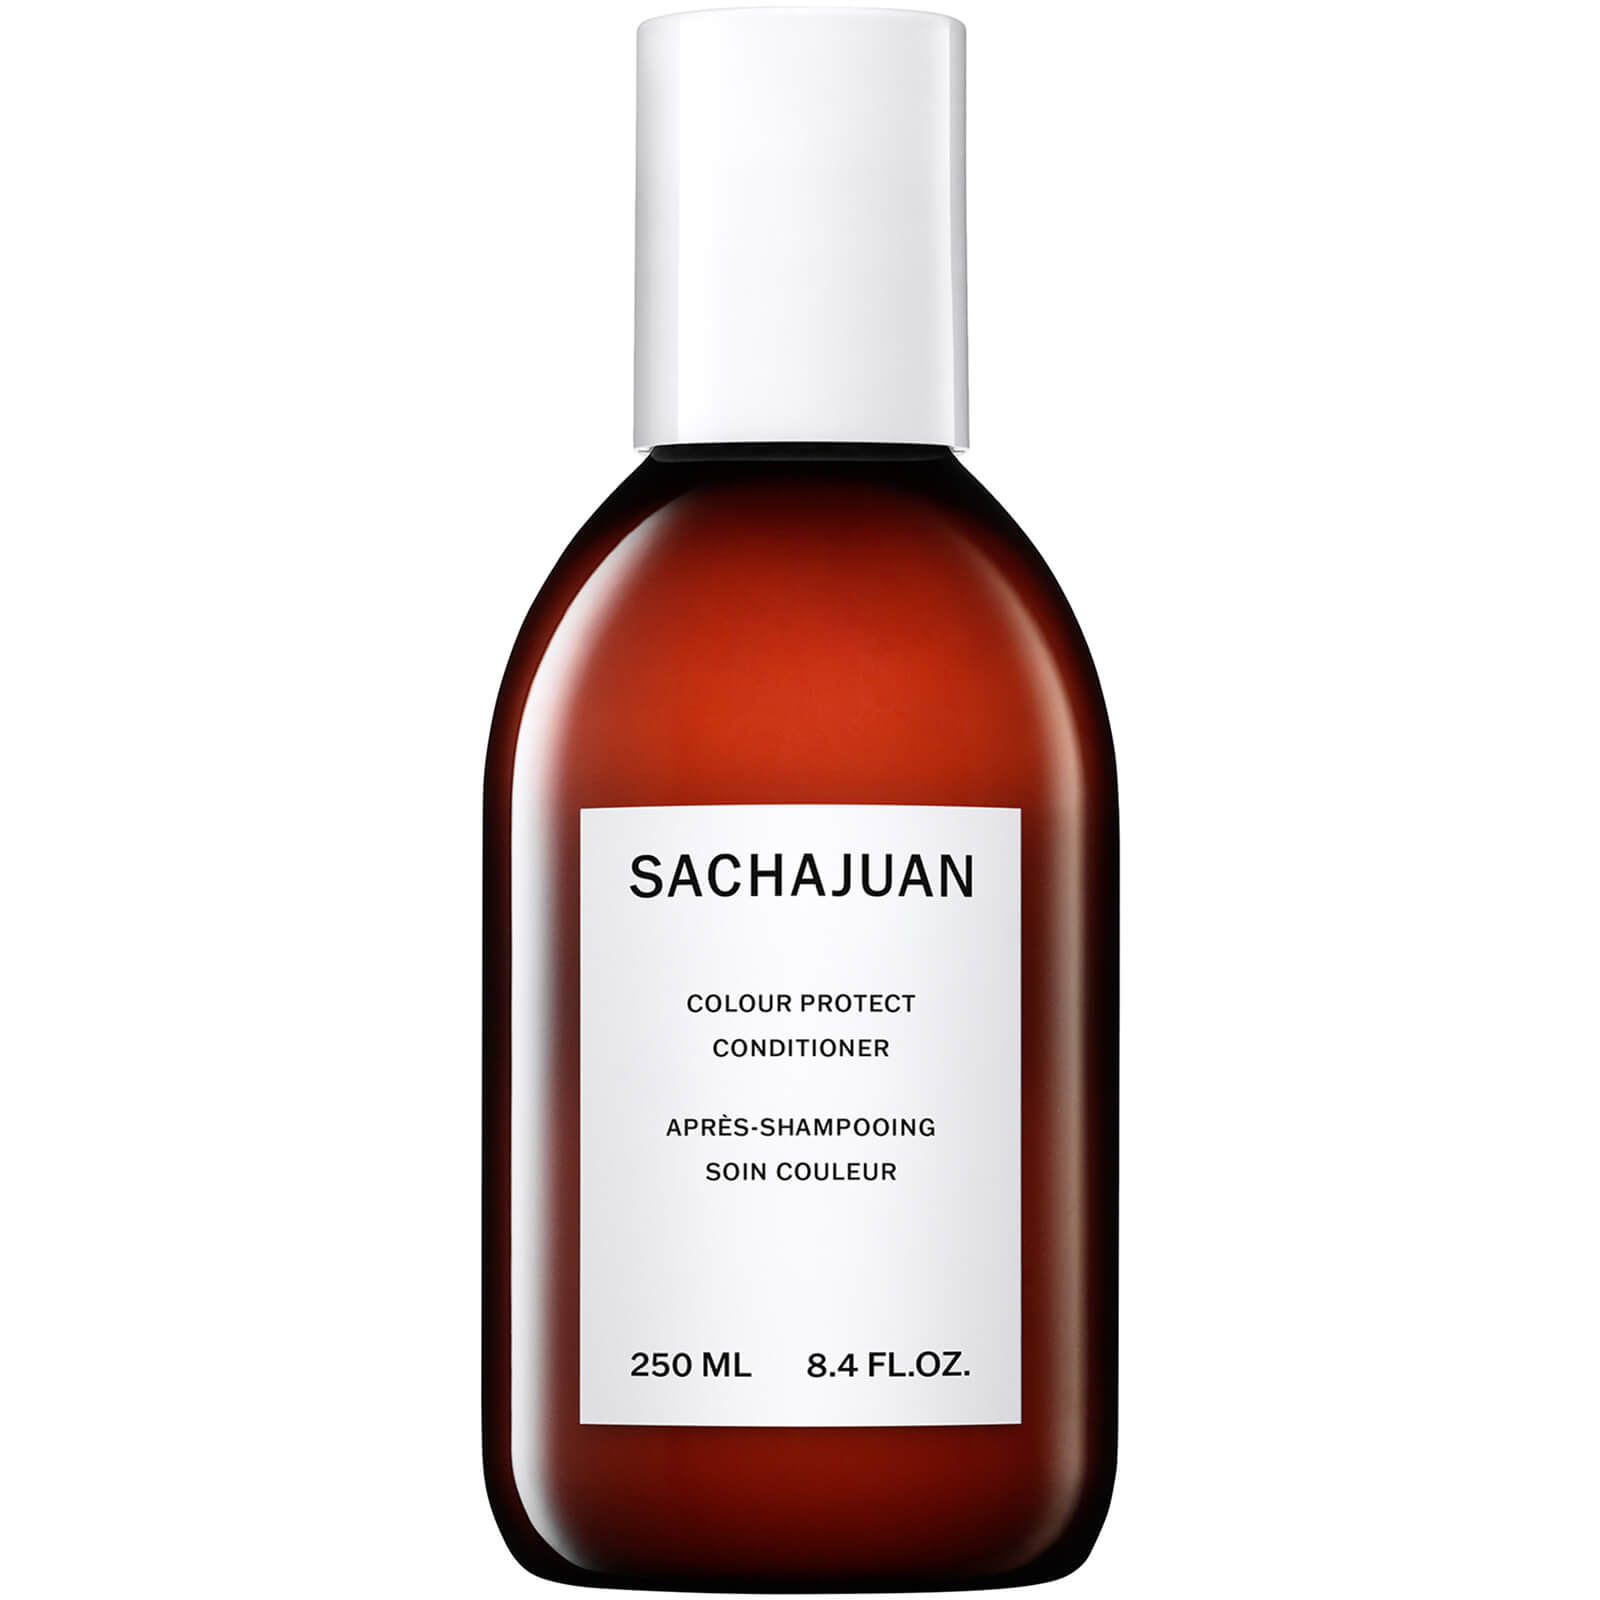 Sachajuan Color Protect Conditioner 250ml product